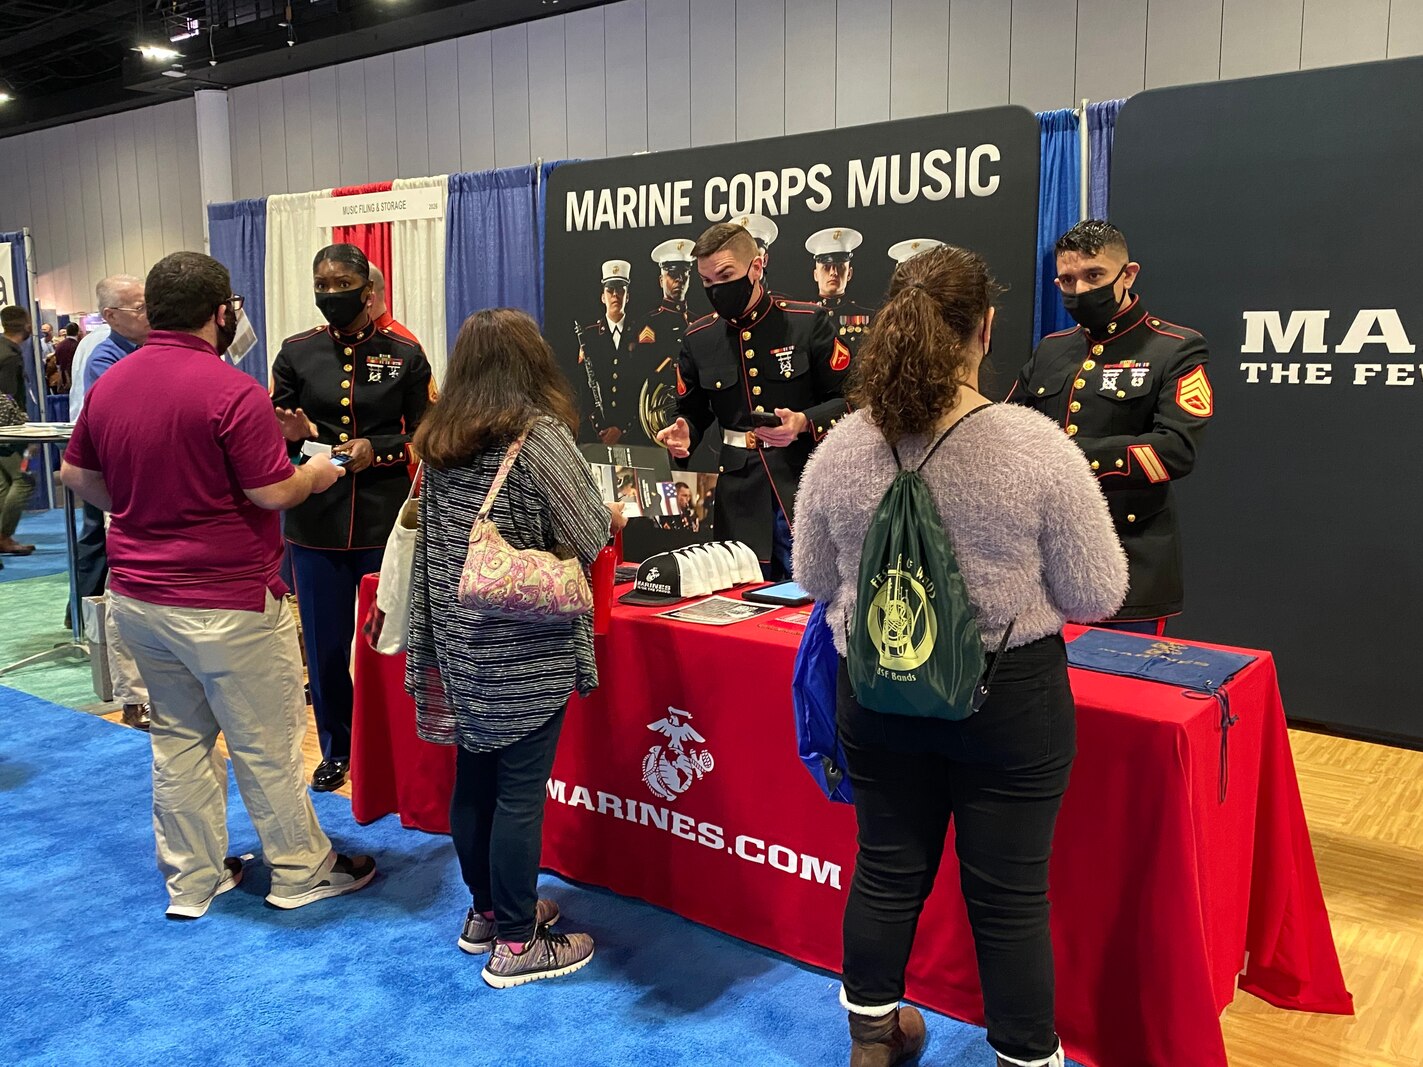 SSgt. Mardia Timoney, 6th Marine Corps District, Musician Technical Assistant, SSgt. Christian Guin, drum major, Parris Island Marine Corps Band, and Lance Cpl. Wolfgang Lynn, guitarist, Marine Forces Reserve Band, educate attendees of the Florida Music Education Association, Professional Development Conference about the Marine Corps Music Program in Tampa, Florida, Jan. 5 2022. The FMEA is one of the largest music education professional development event In the United States. (Photo by Sgt. Erin Morejon)